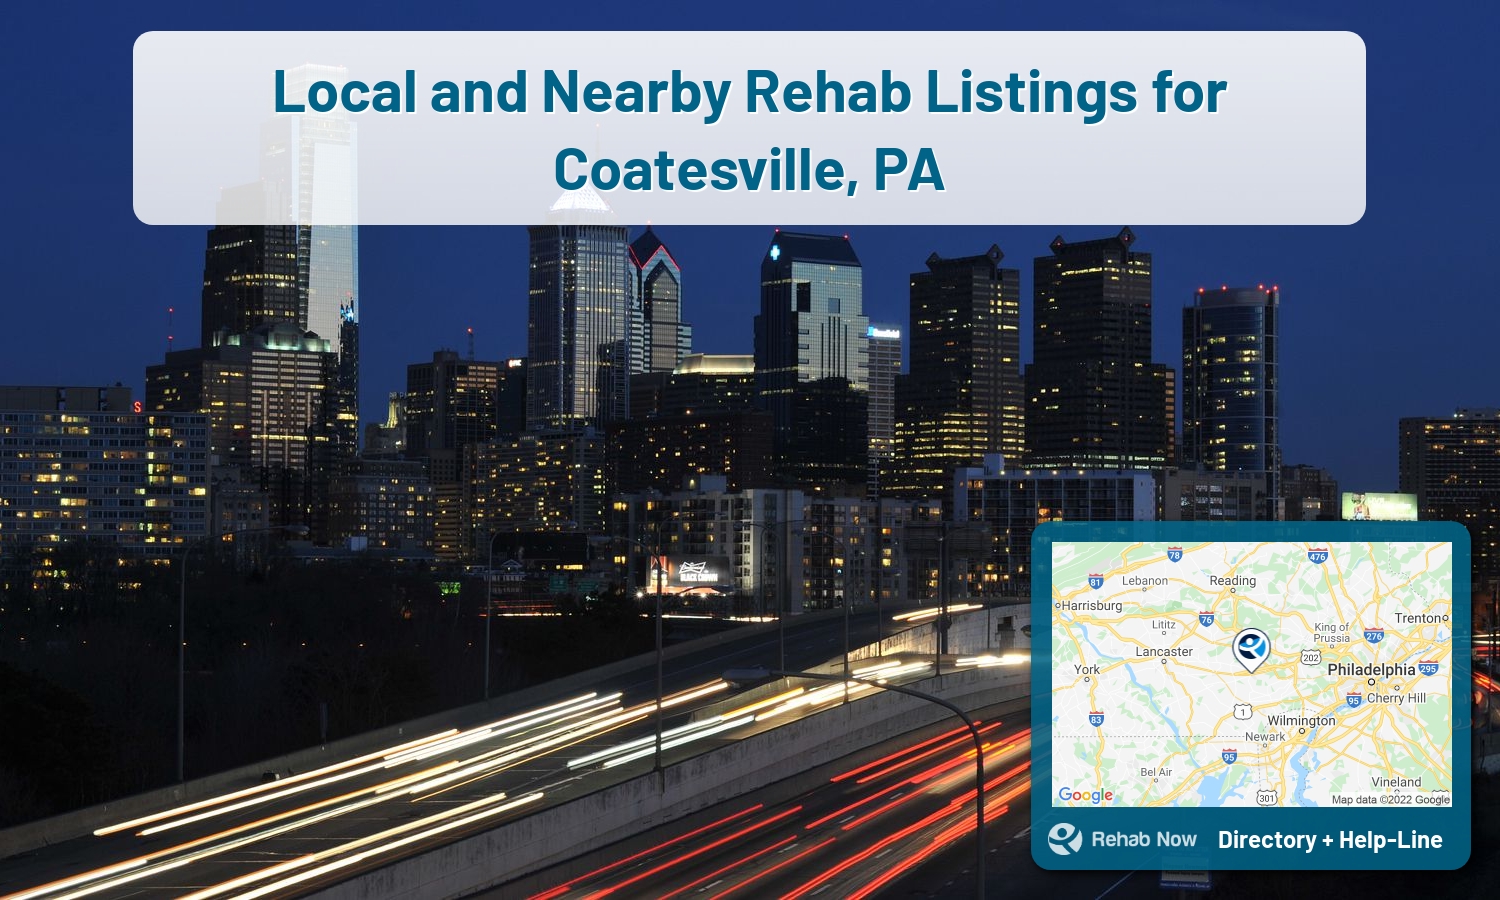 View options, availability, treatment methods, and more, for drug rehab and alcohol treatment in Coatesville, Pennsylvania